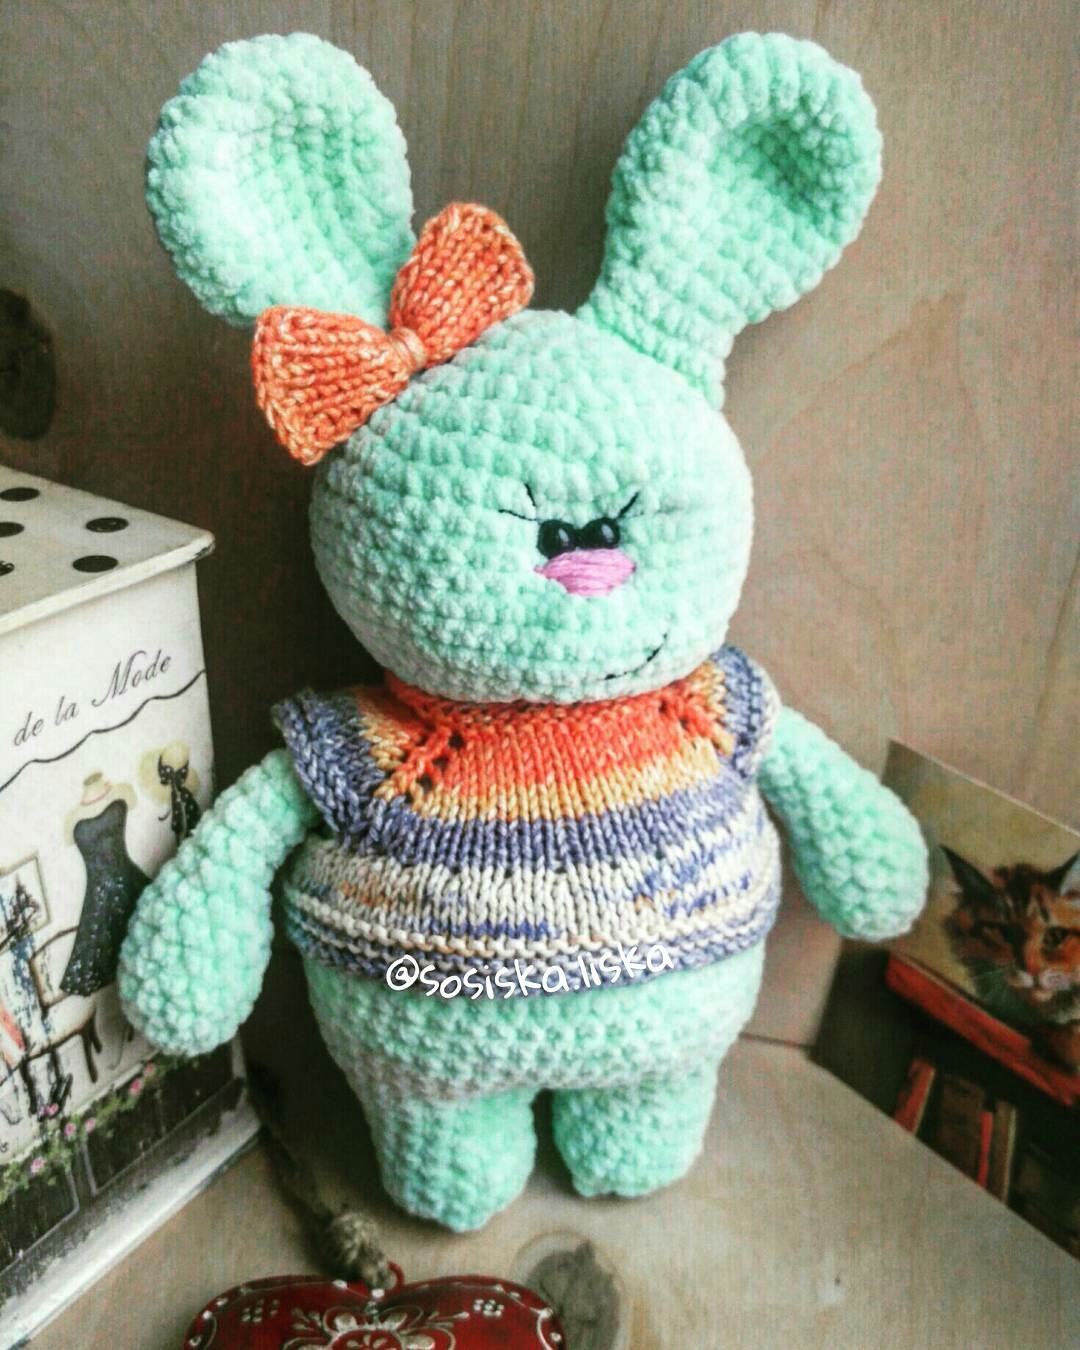 Bunny Mint - Longpost, The 14th of February, Presents, Handmade, Handmade, Toys, Needlework, With your own hands, My